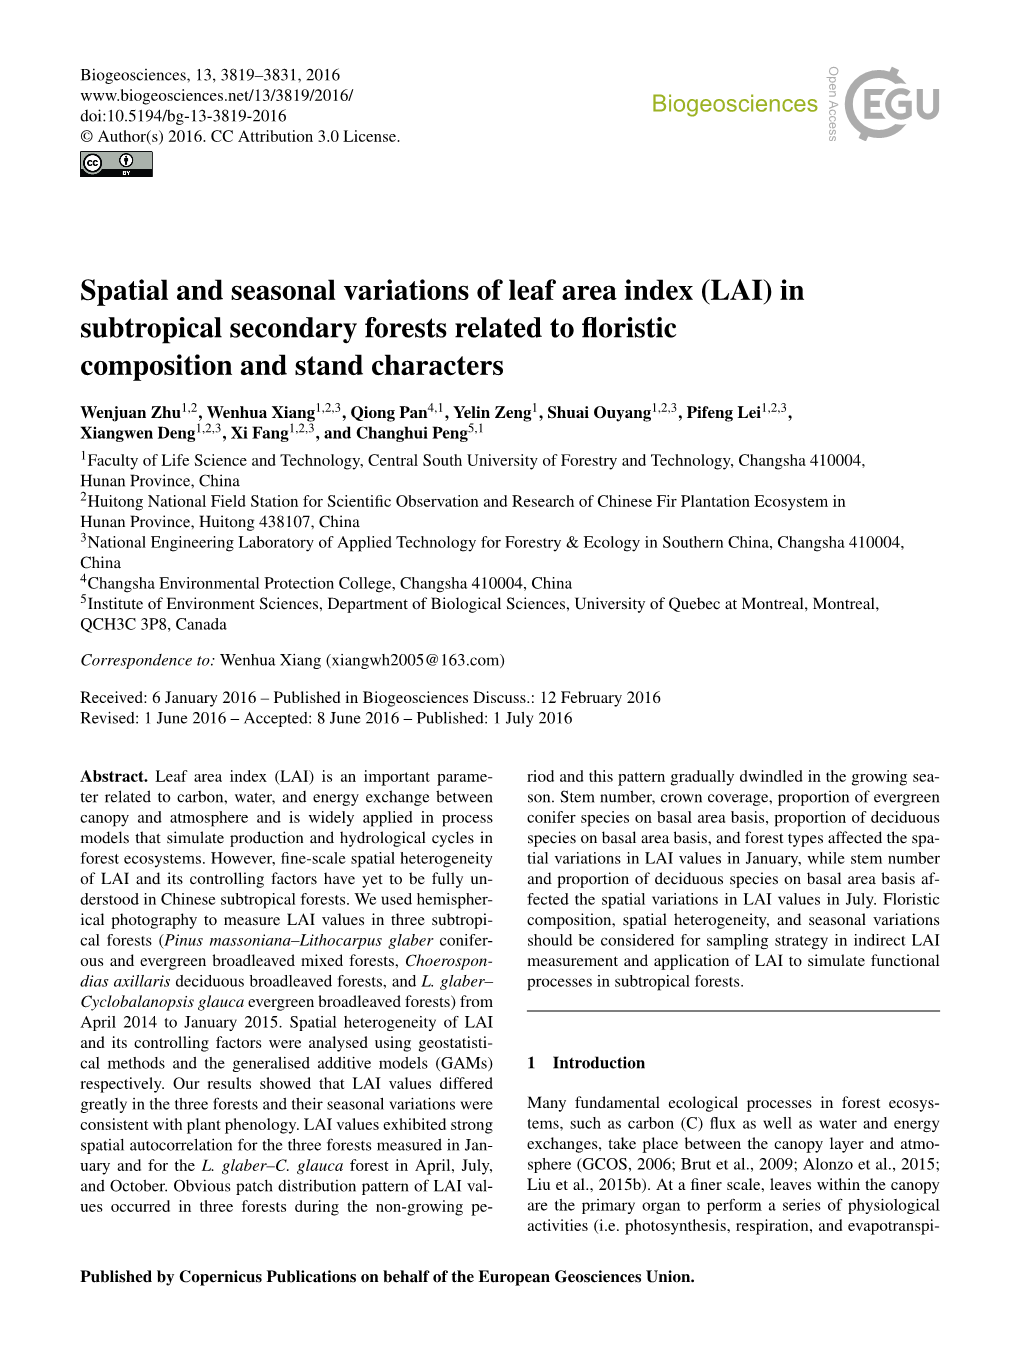 Spatial and Seasonal Variations of Leaf Area Index (LAI) in Subtropical Secondary Forests Related to ﬂoristic Composition and Stand Characters